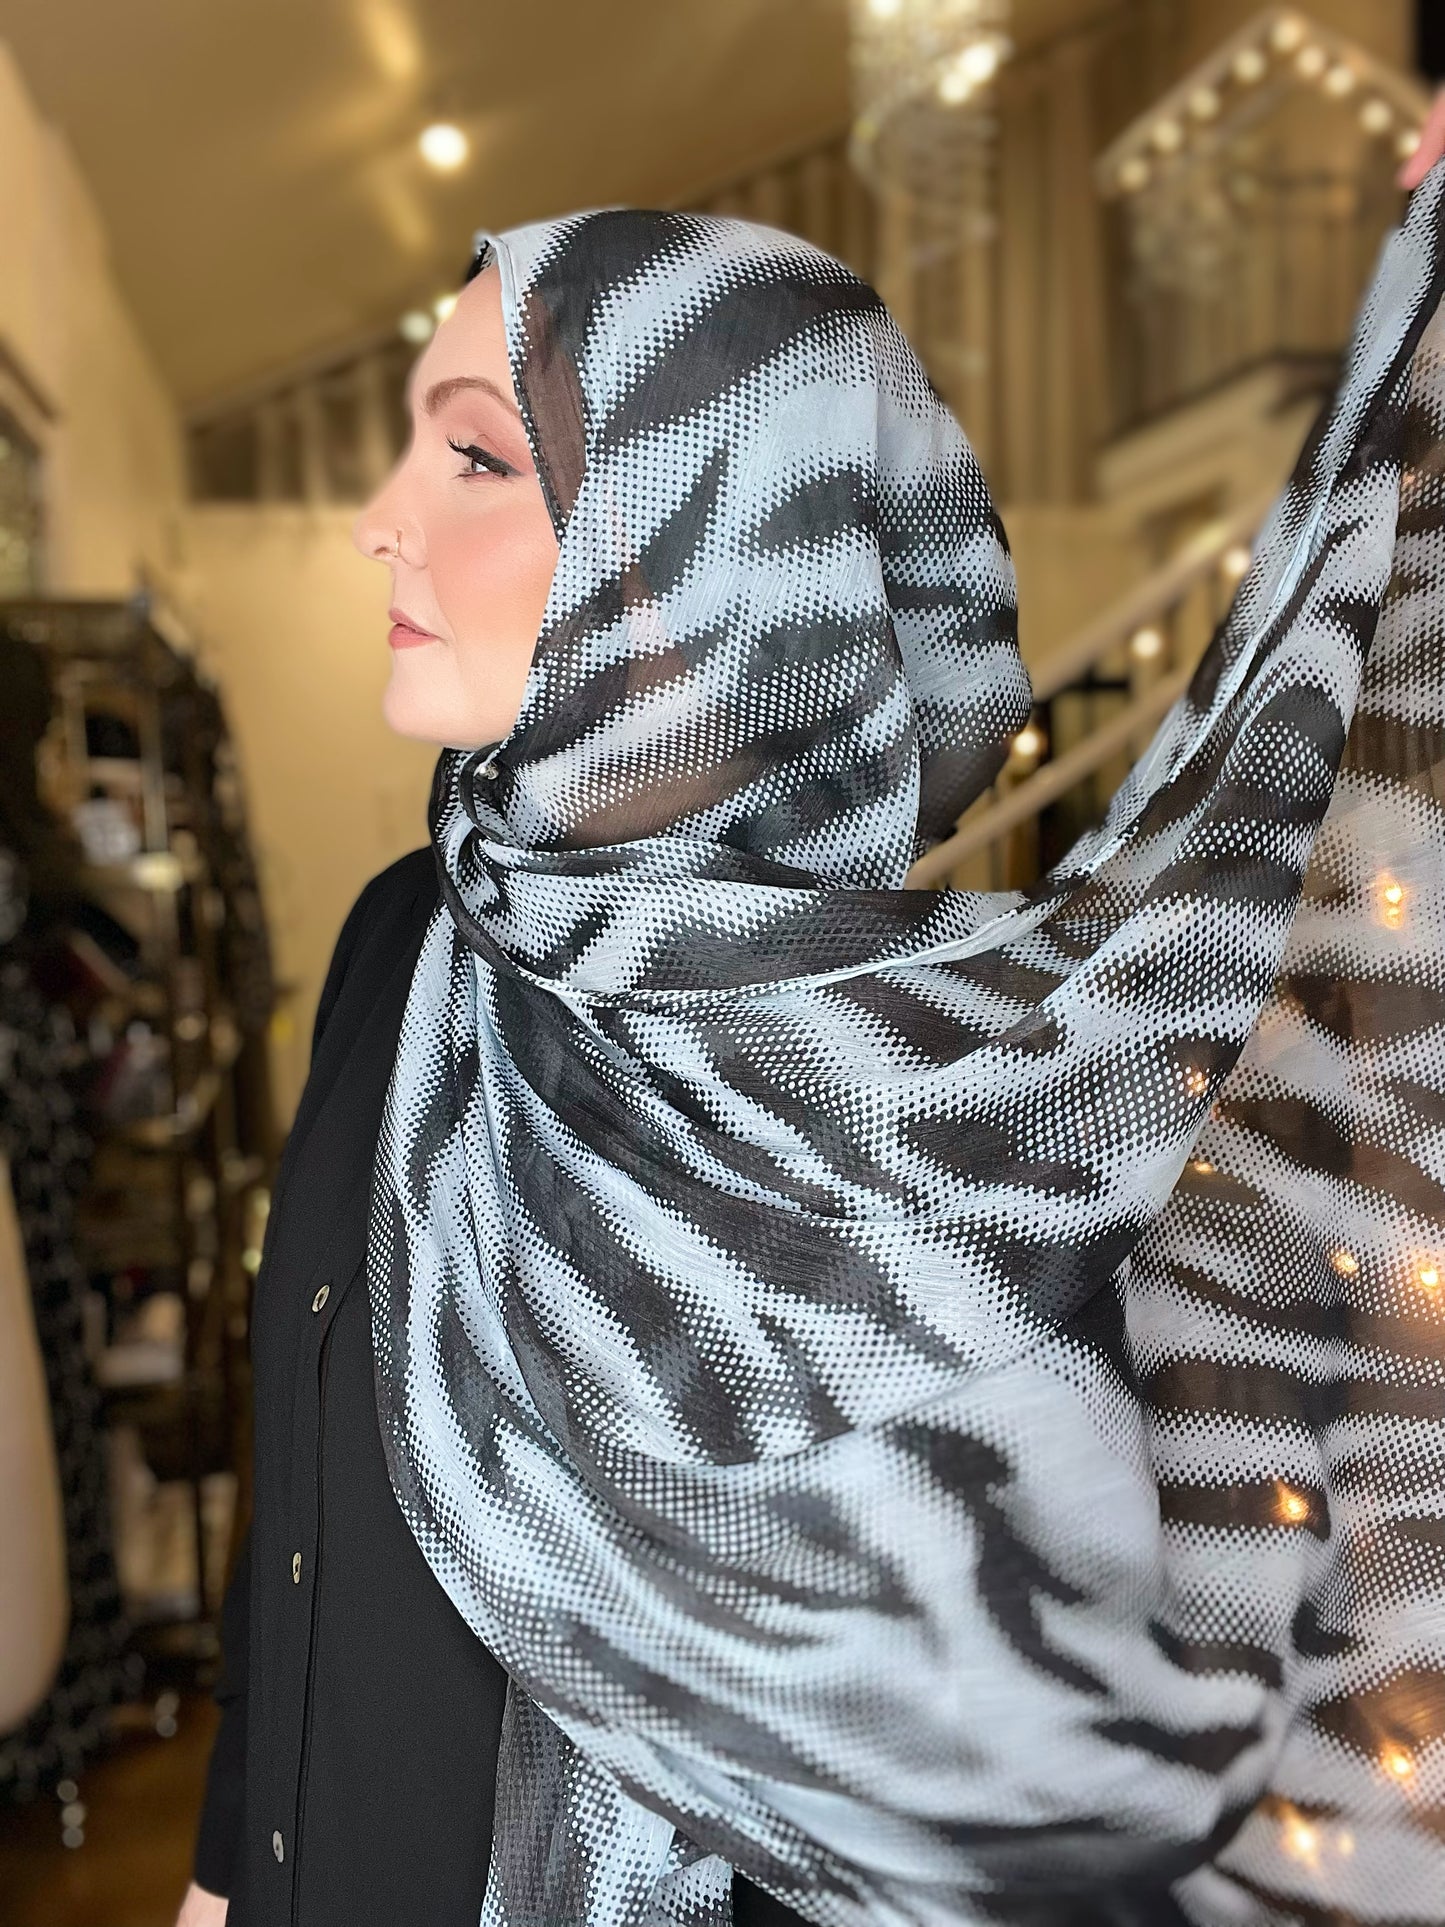 Crinkle Chiffon Hijab: Shimmer Charcoal Icy Blue